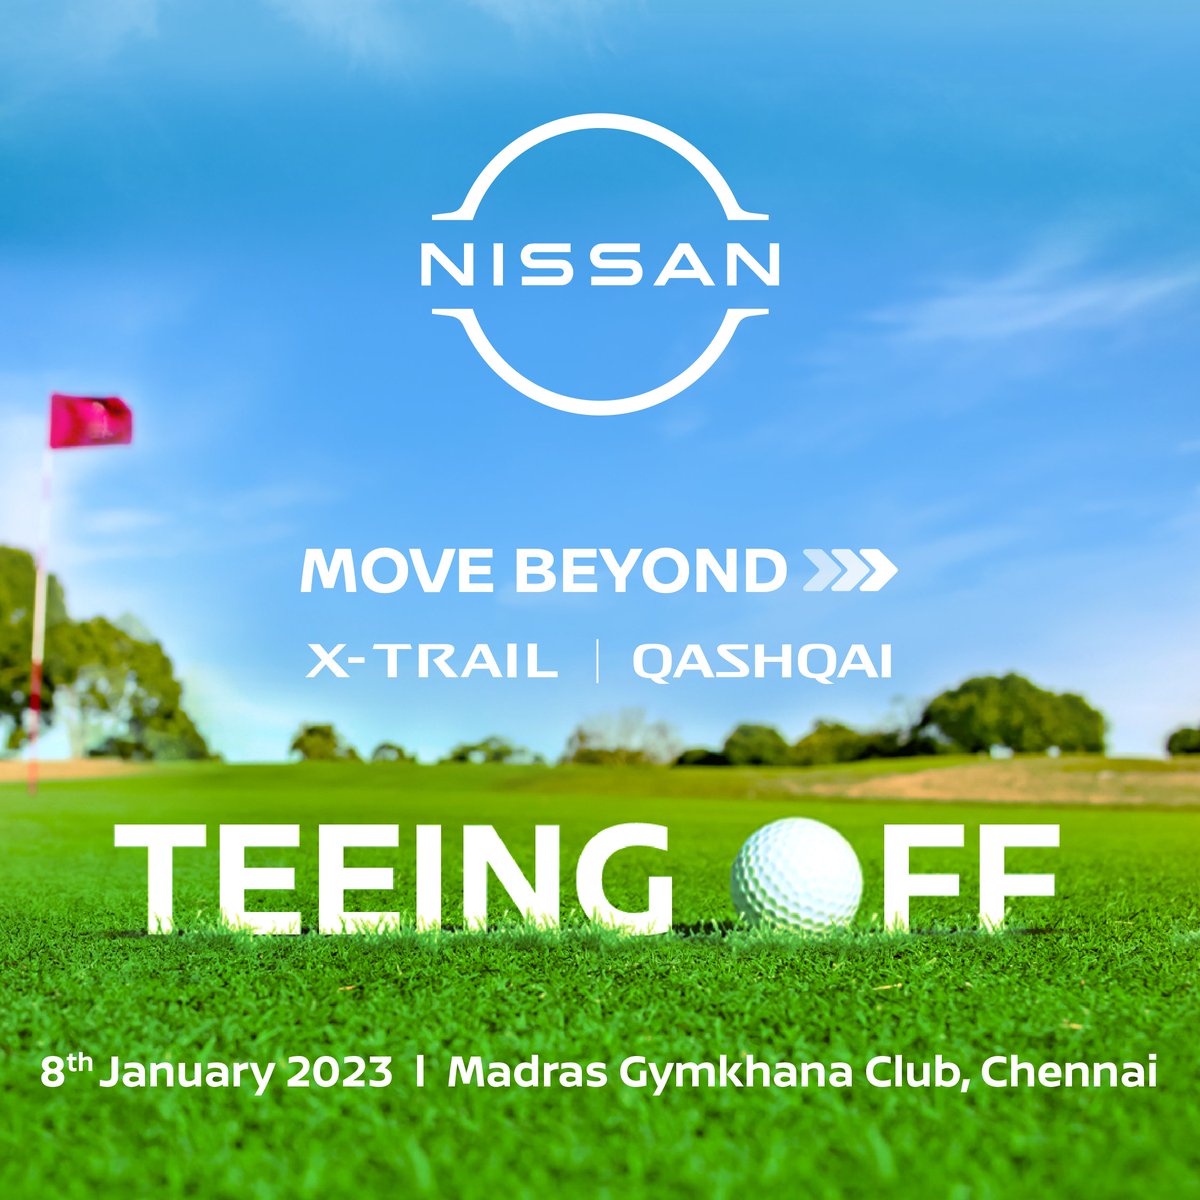 The Move beyond Golf Tournament Tees off in Chennai on the 8th January, 2023. Stay Tuned for all the action and glimpses of the global SUVs Nissan X-Trail and Nissan Qashqai. #nissanindia #movebeyond